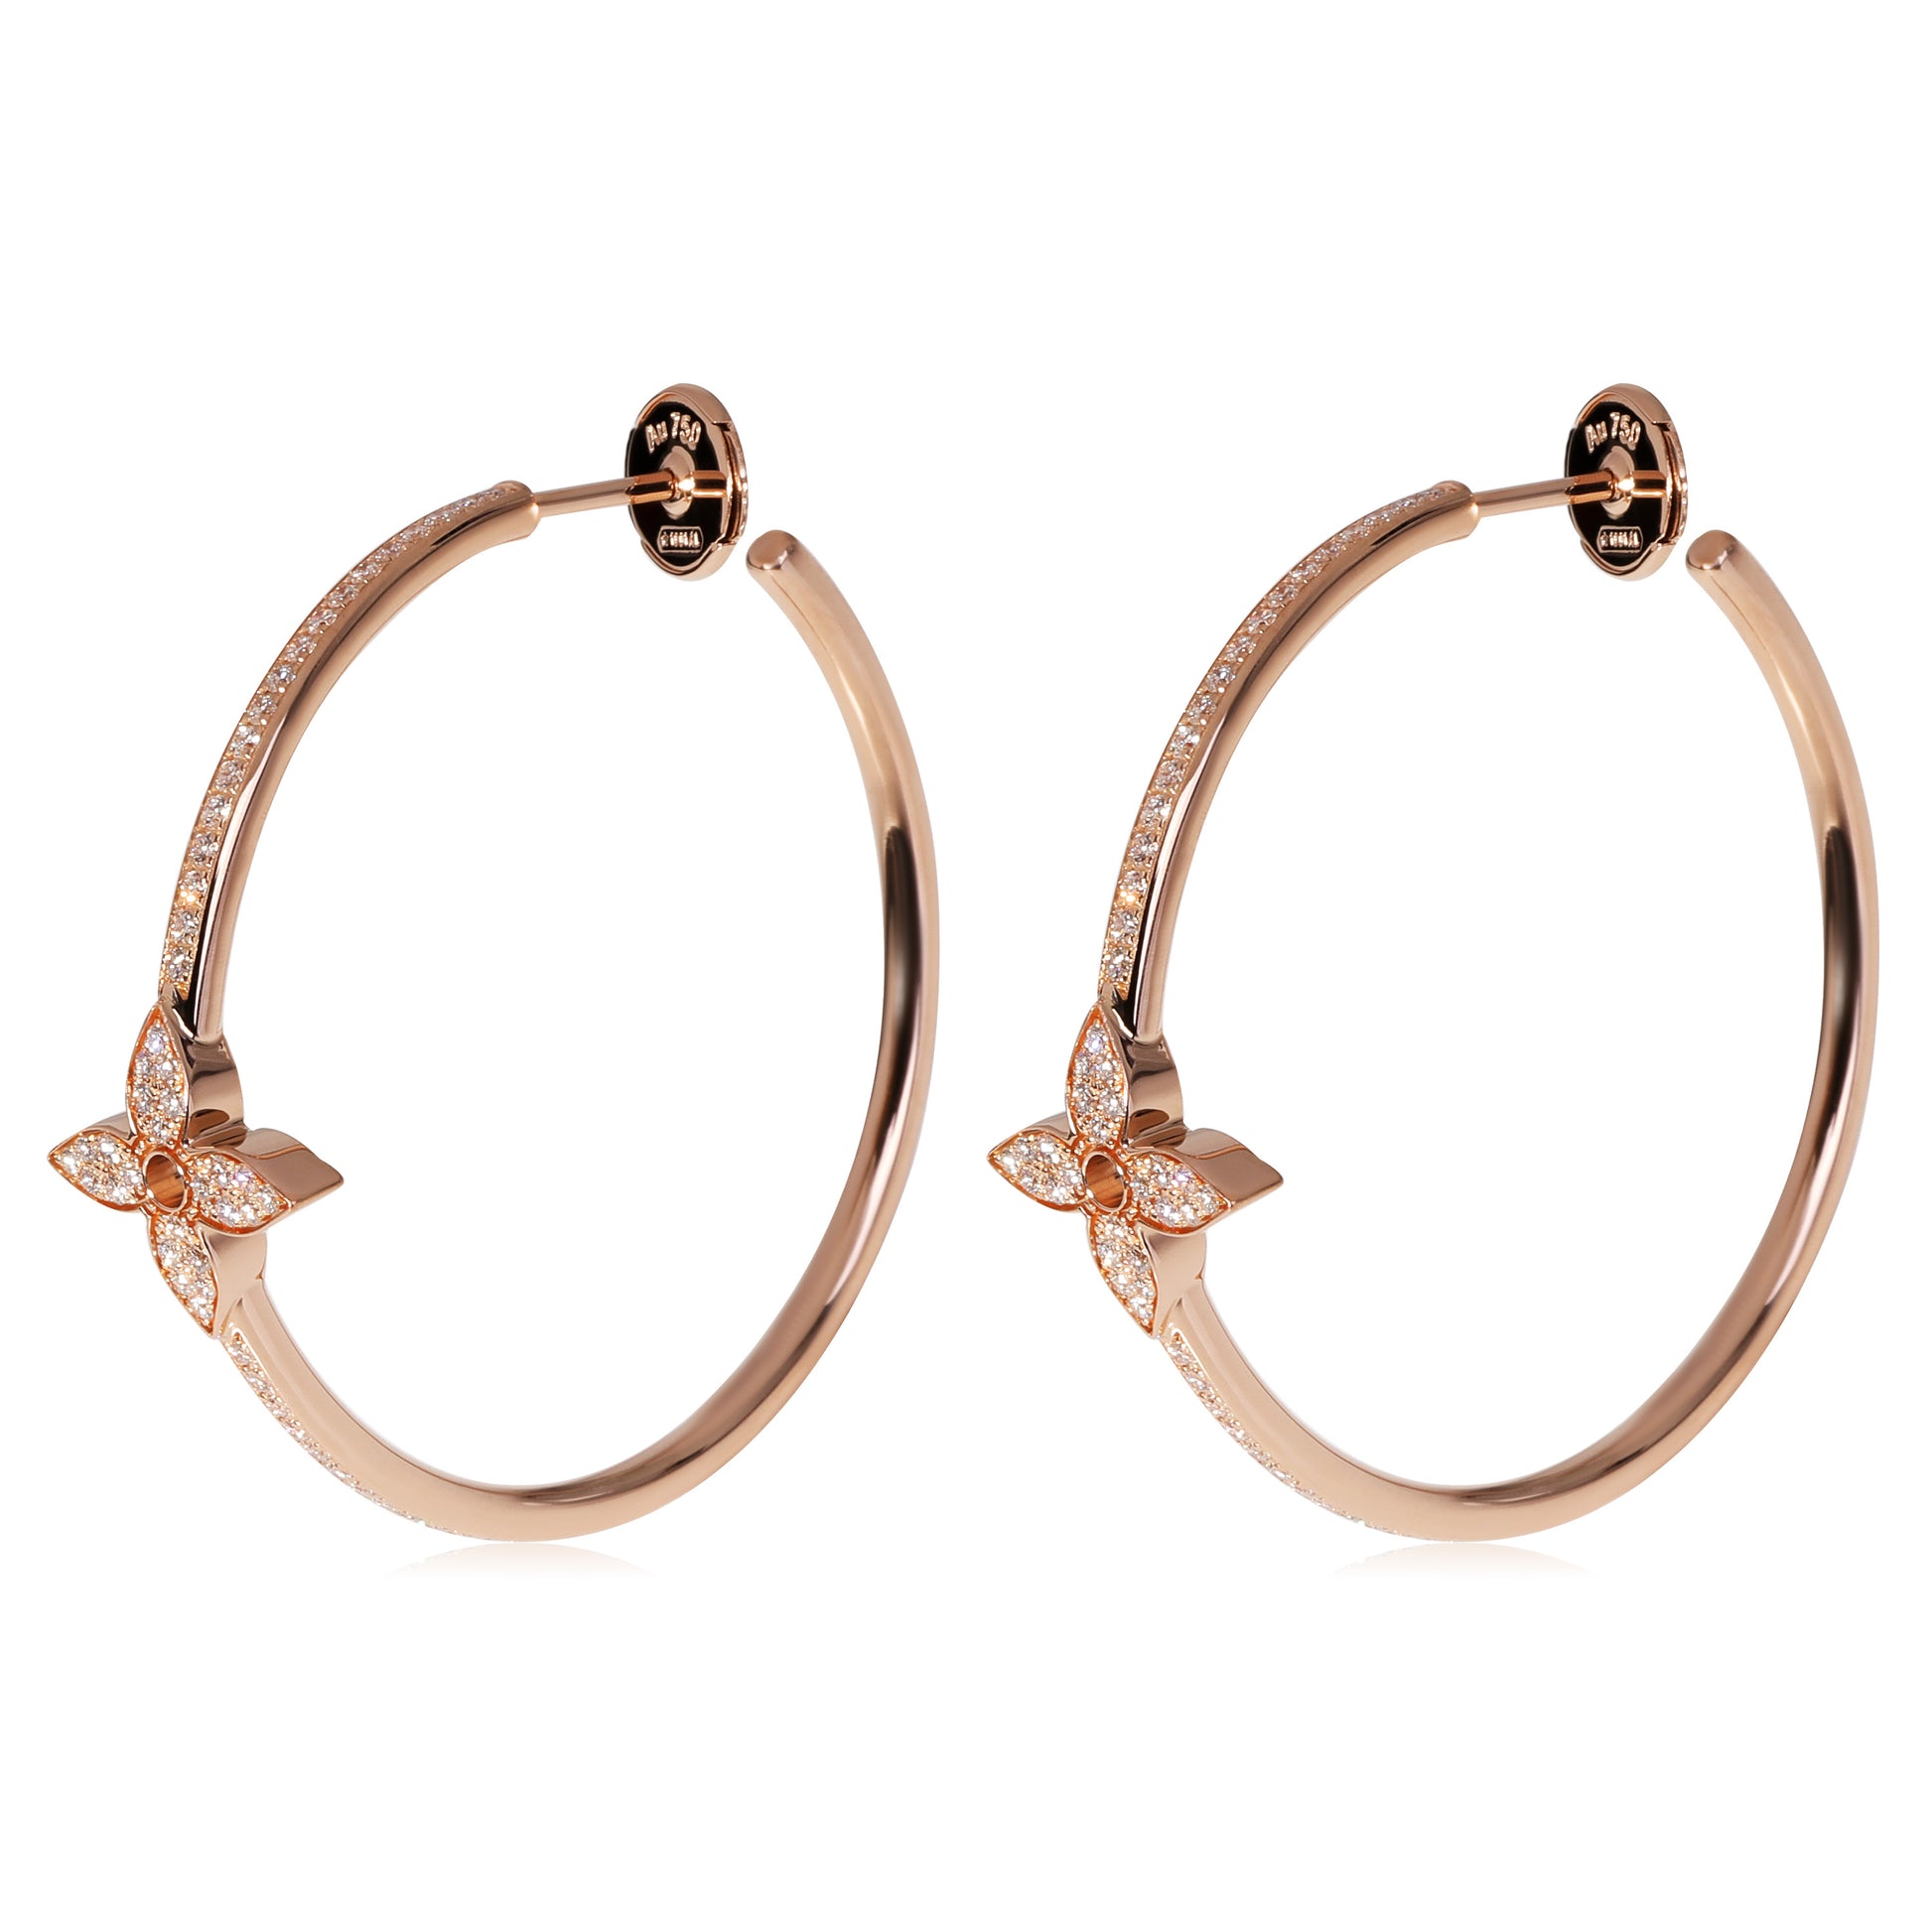 Idylle Blossom Small Hoop, Pink Gold And Diamond - Per Unit